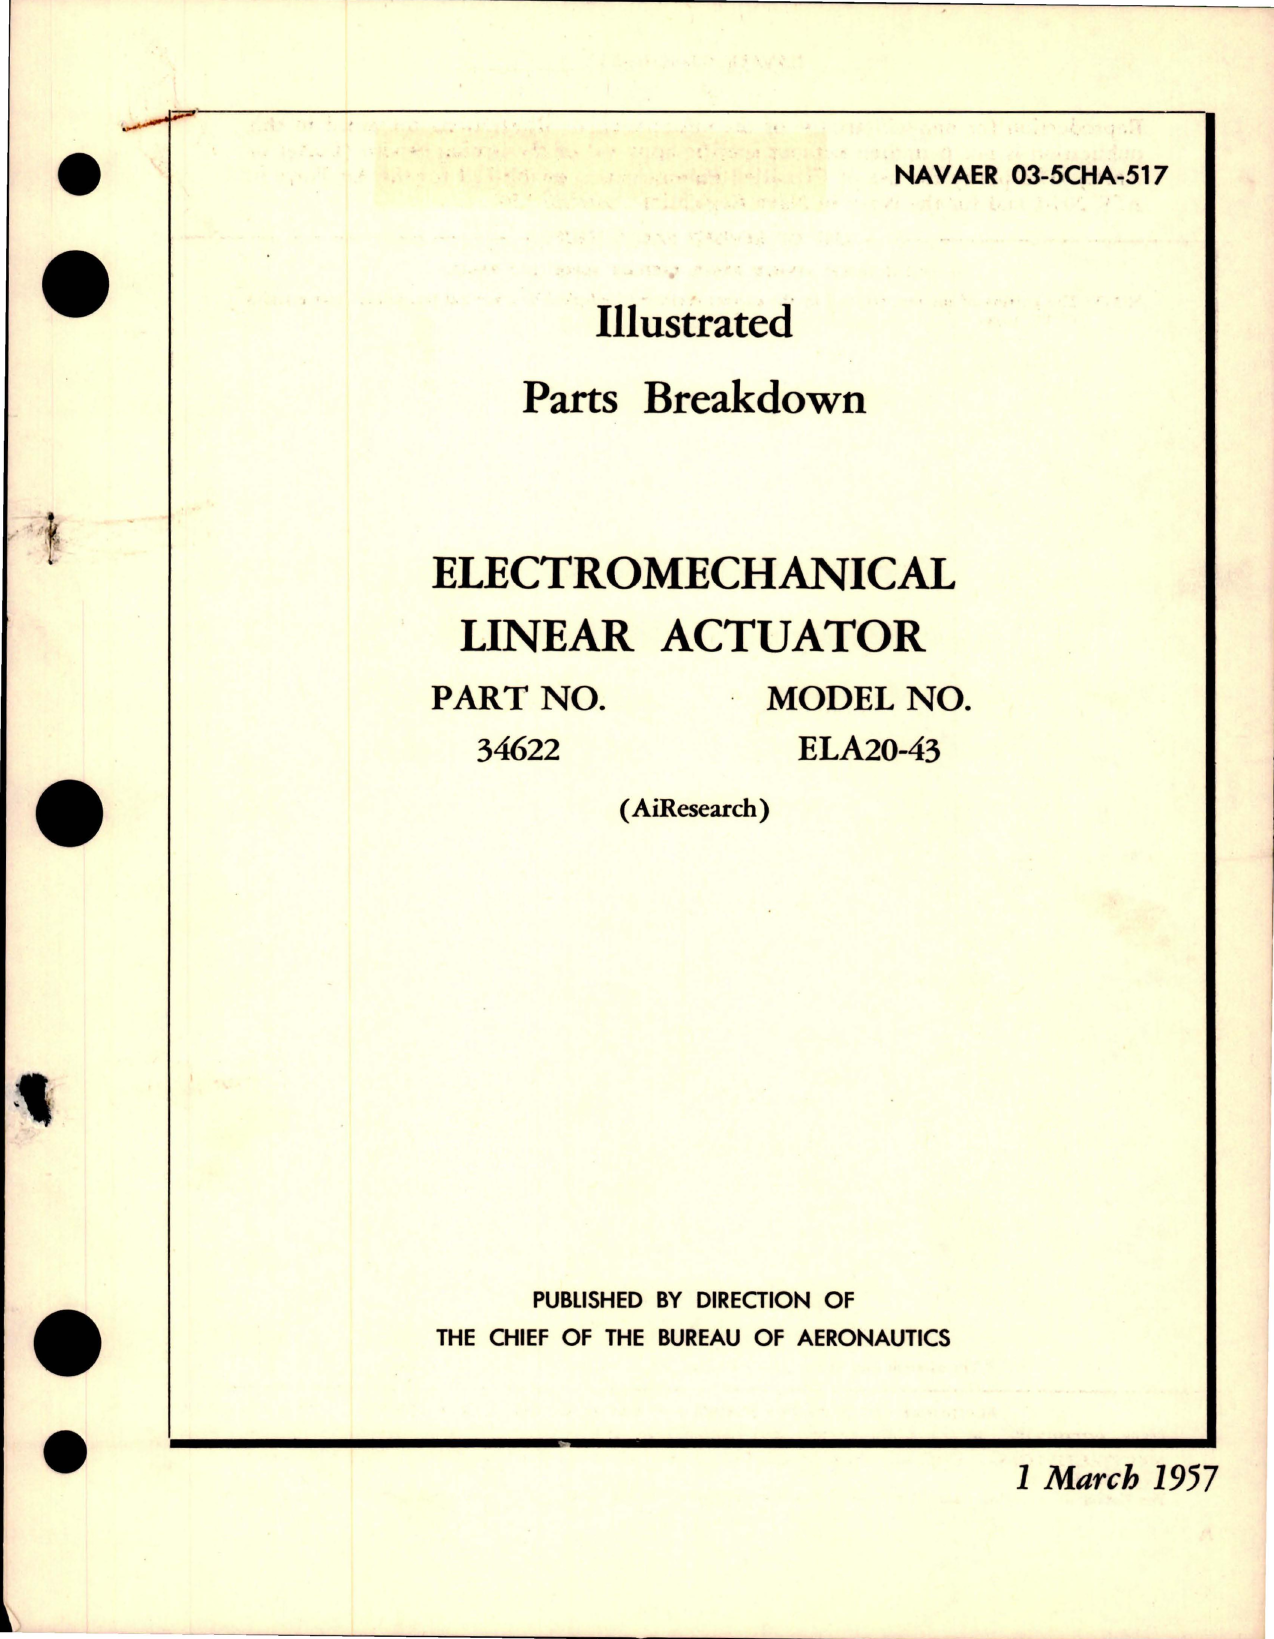 Sample page 1 from AirCorps Library document: Parts Breakdown for Electromechanical Linear Actuator for Part 34622 - Model ELA20-43 